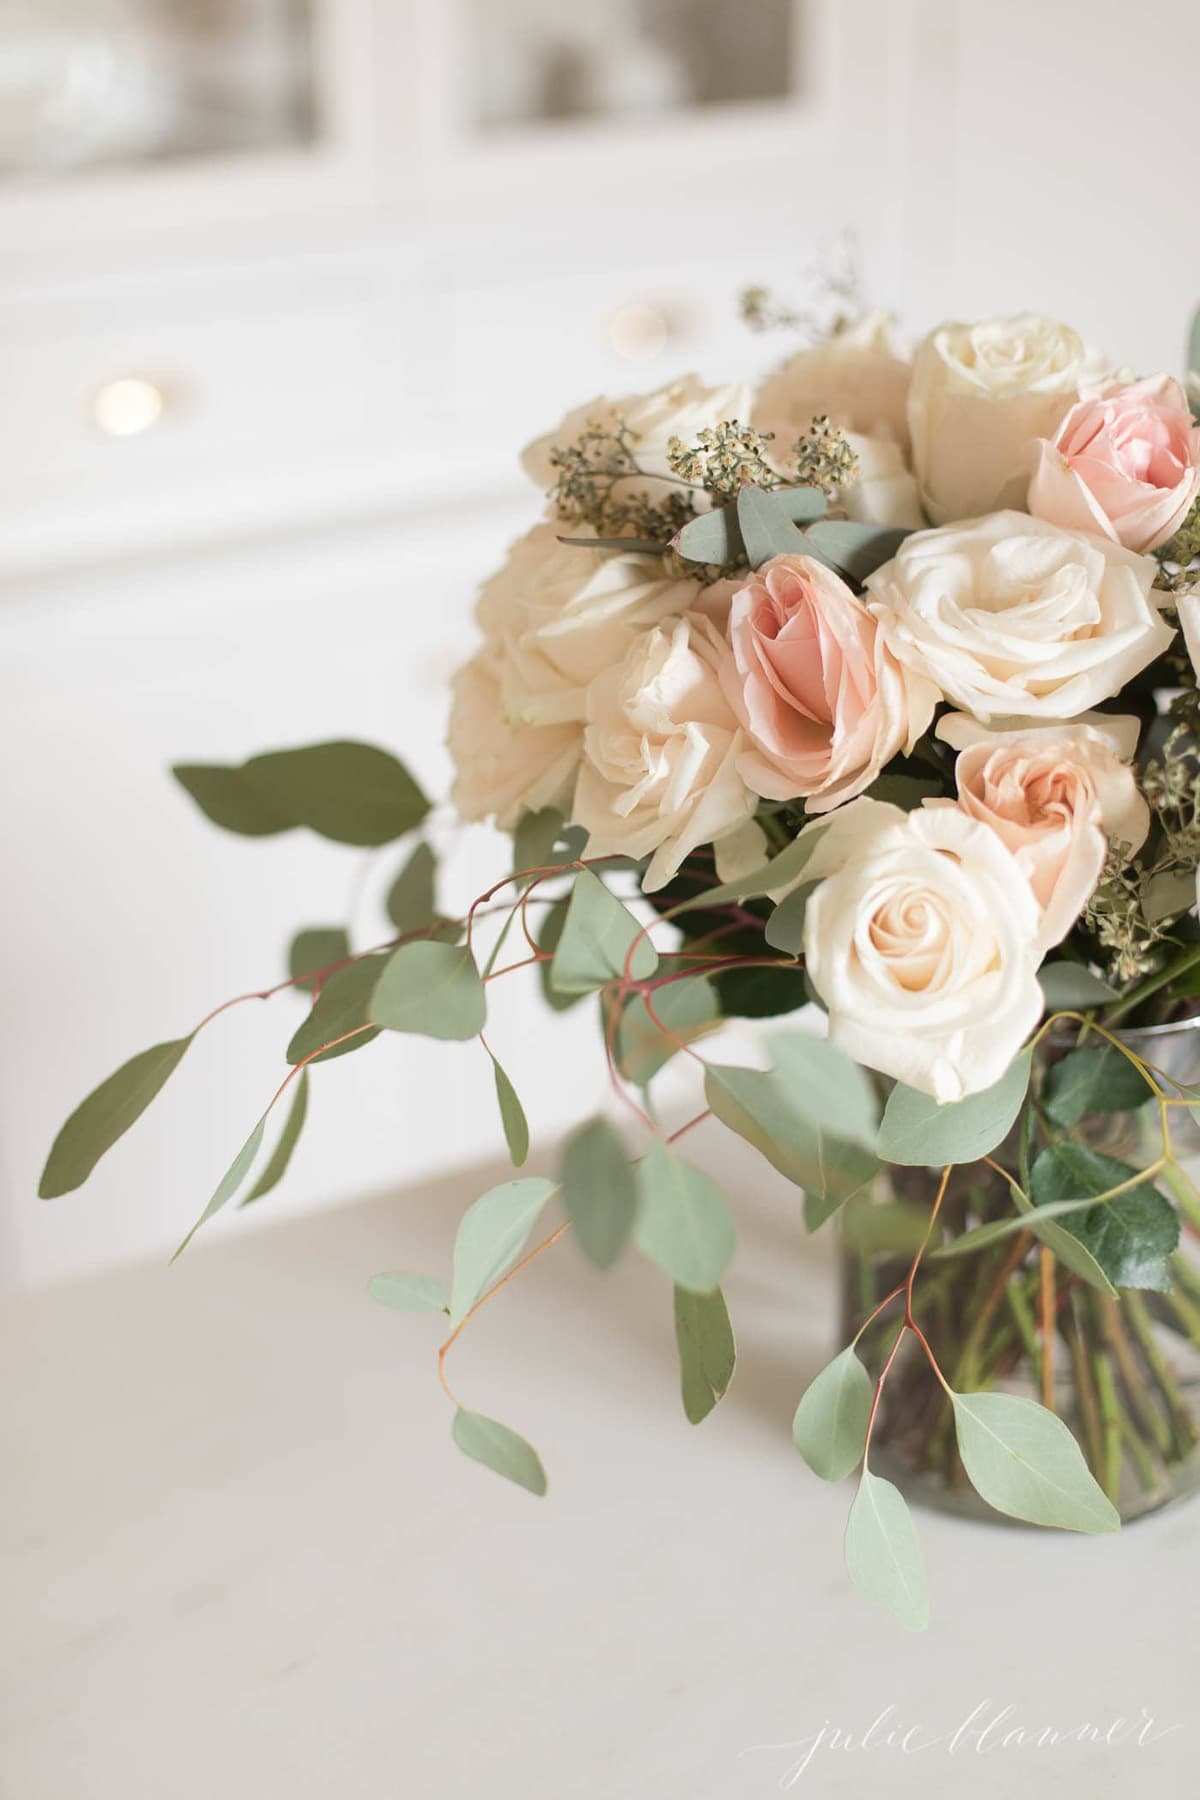 pastel peach roses and soft gray eucalyptus foliage floral design in a white kitchen.